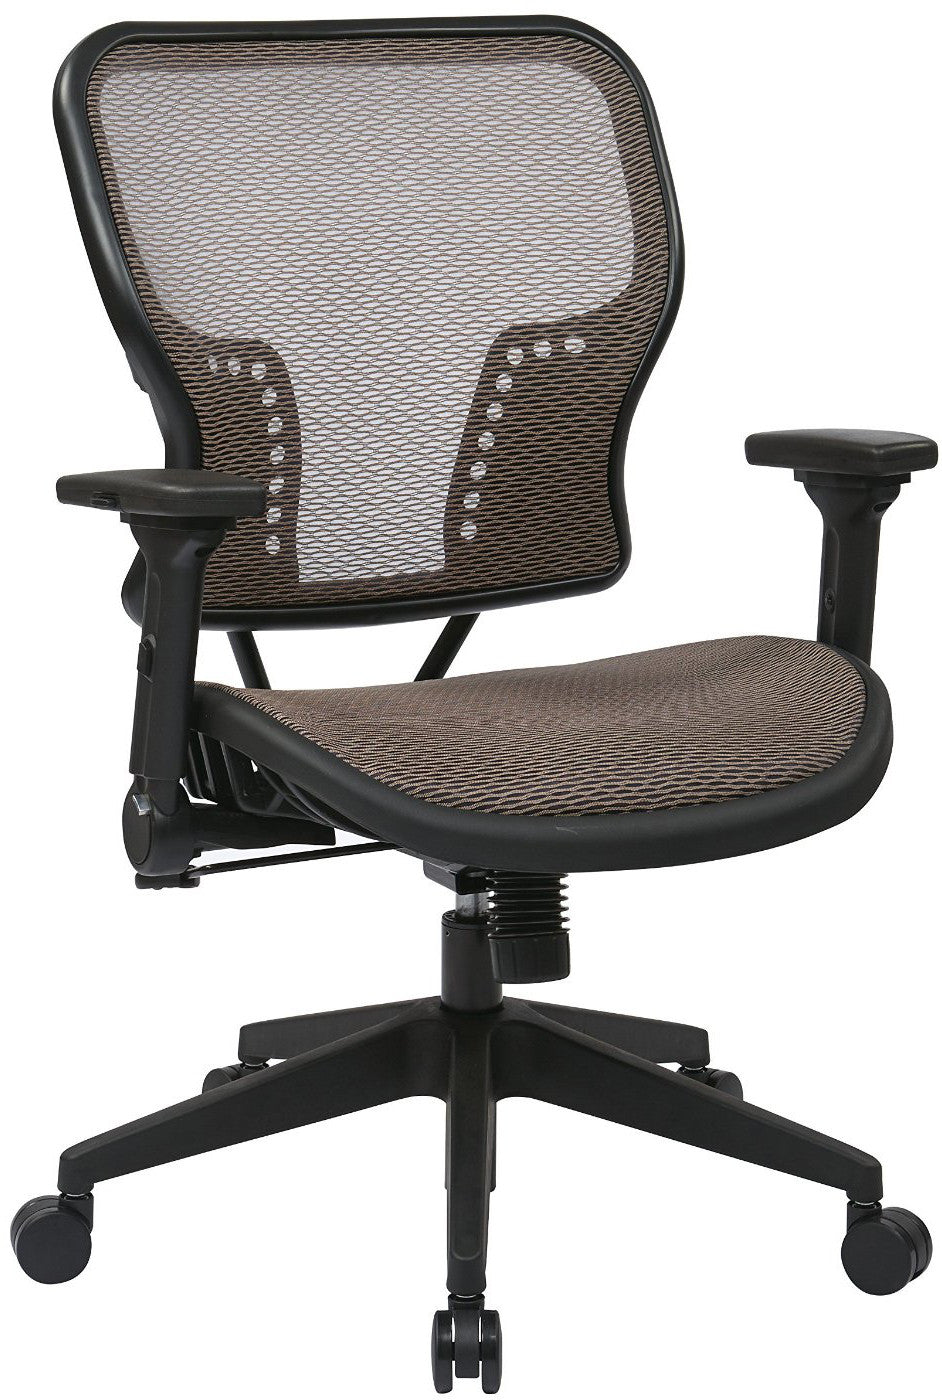 Space Seating 213-88n1f3 Latte Air Grid¨ Seat And Back Chair With 2-to-1 Synchro Tilt Control